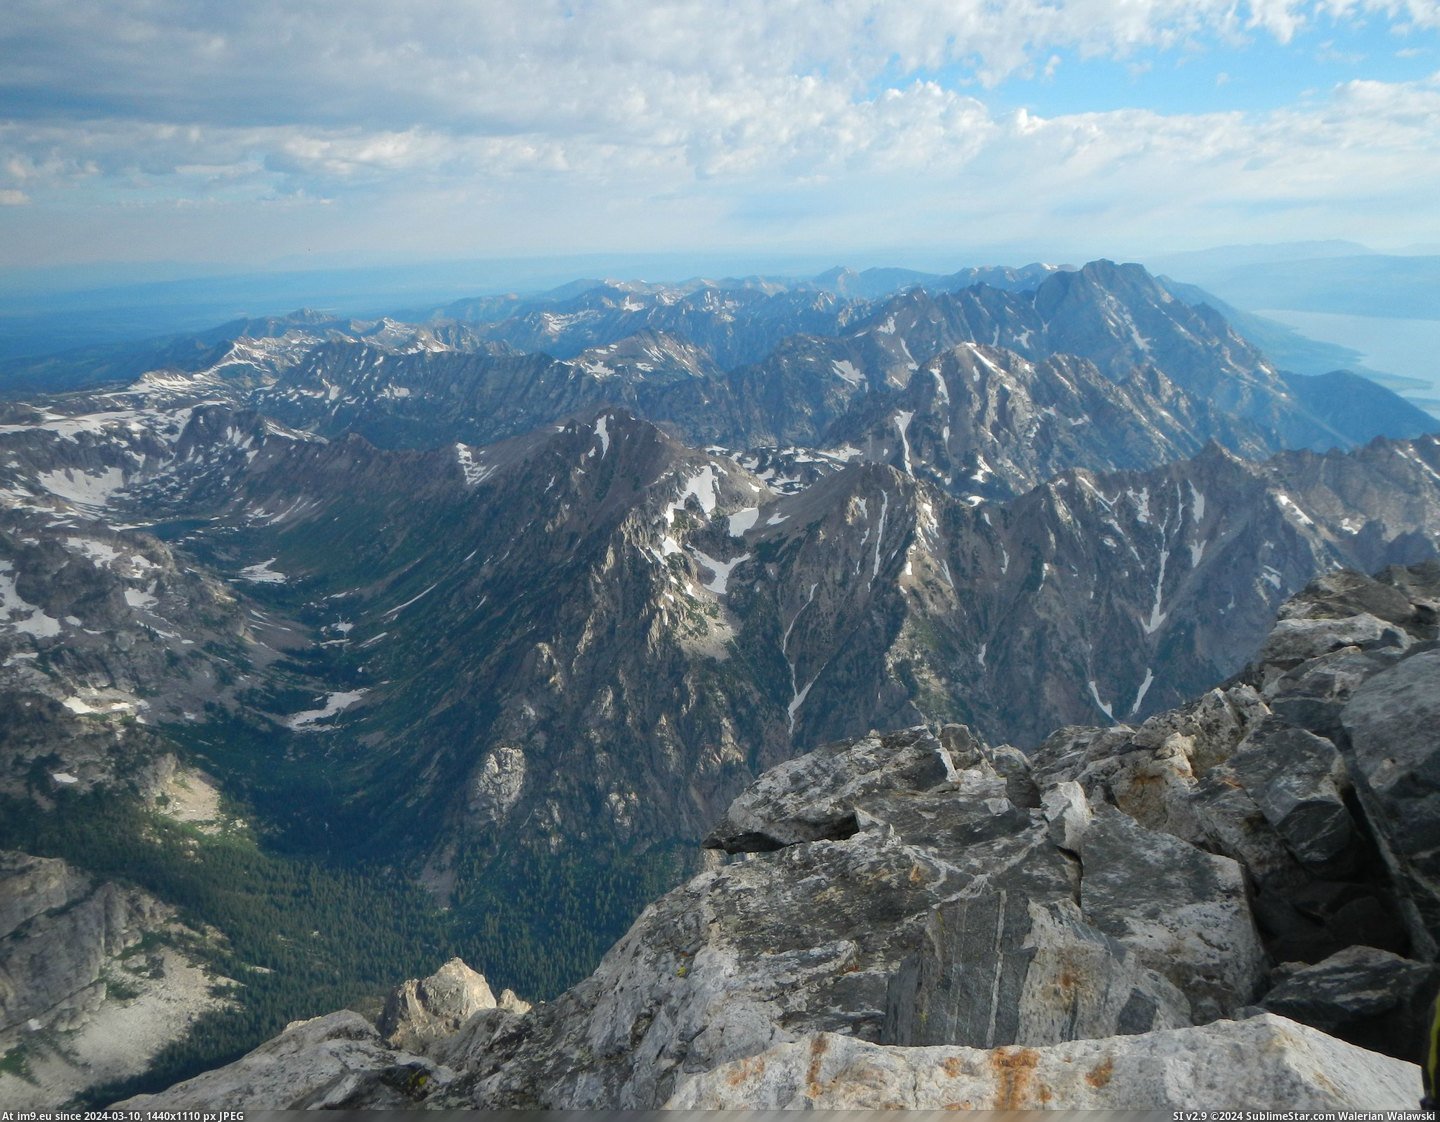 #Canyon #Grand #Worth #Cascade #Viewed #Pain #Summit #Teton [Earthporn] The view was worth the pain. Cascade Canyon as viewed from the summit of the Grand Teton 2674x2073 [OC] Pic. (Изображение из альбом My r/EARTHPORN favs))